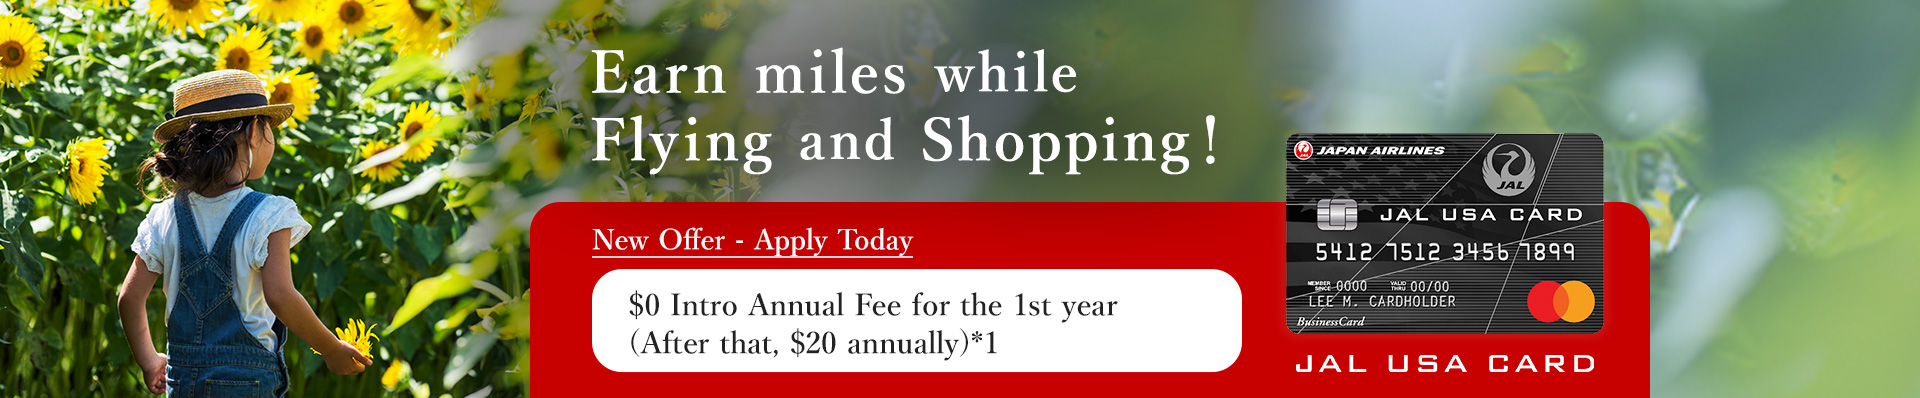 Earn miles while Flying and Shopping! - New Offer- Apply Today - $0 Intro Annual Fee for the 1st year (After that, $20 annually) *1